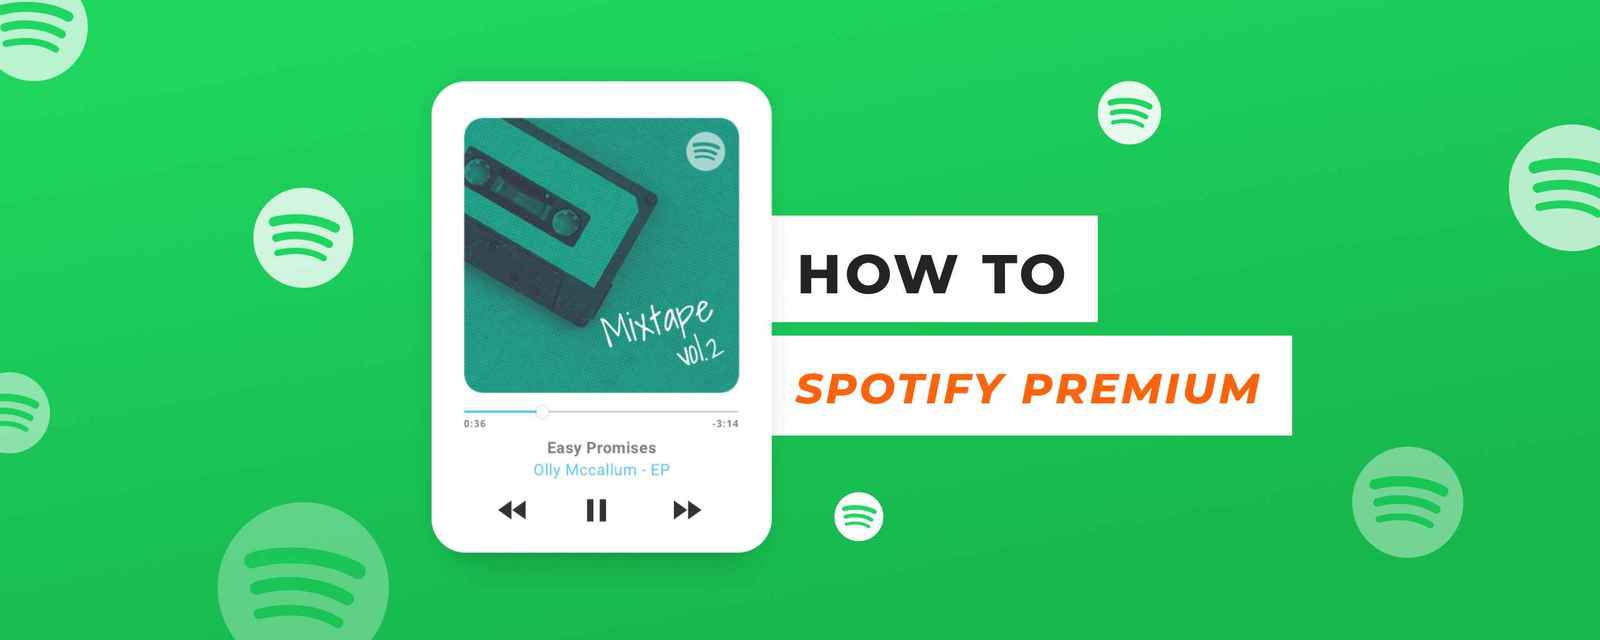 How to get free spotify premium